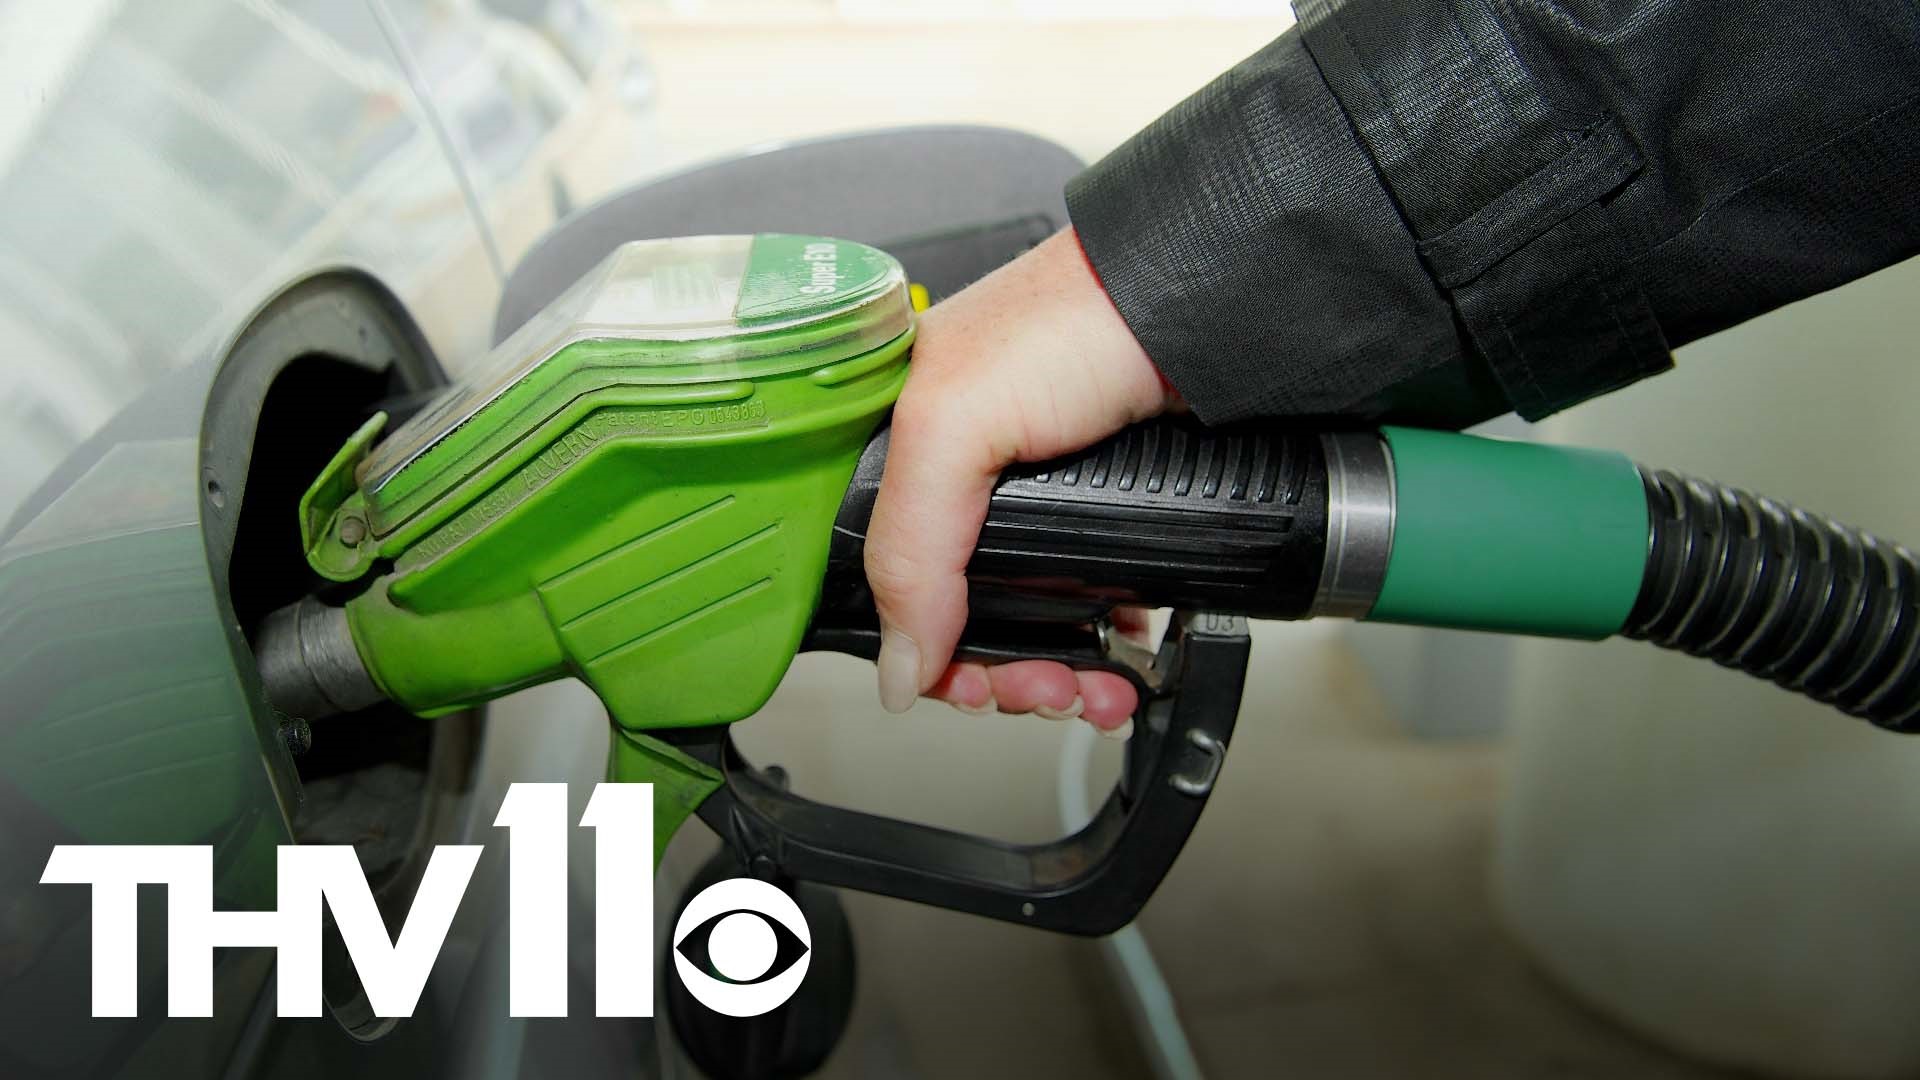 With gas prices still on the rise, some in the state might be considering the use of ethanol fuel to save on some of the cost. But, experts are advising against it.